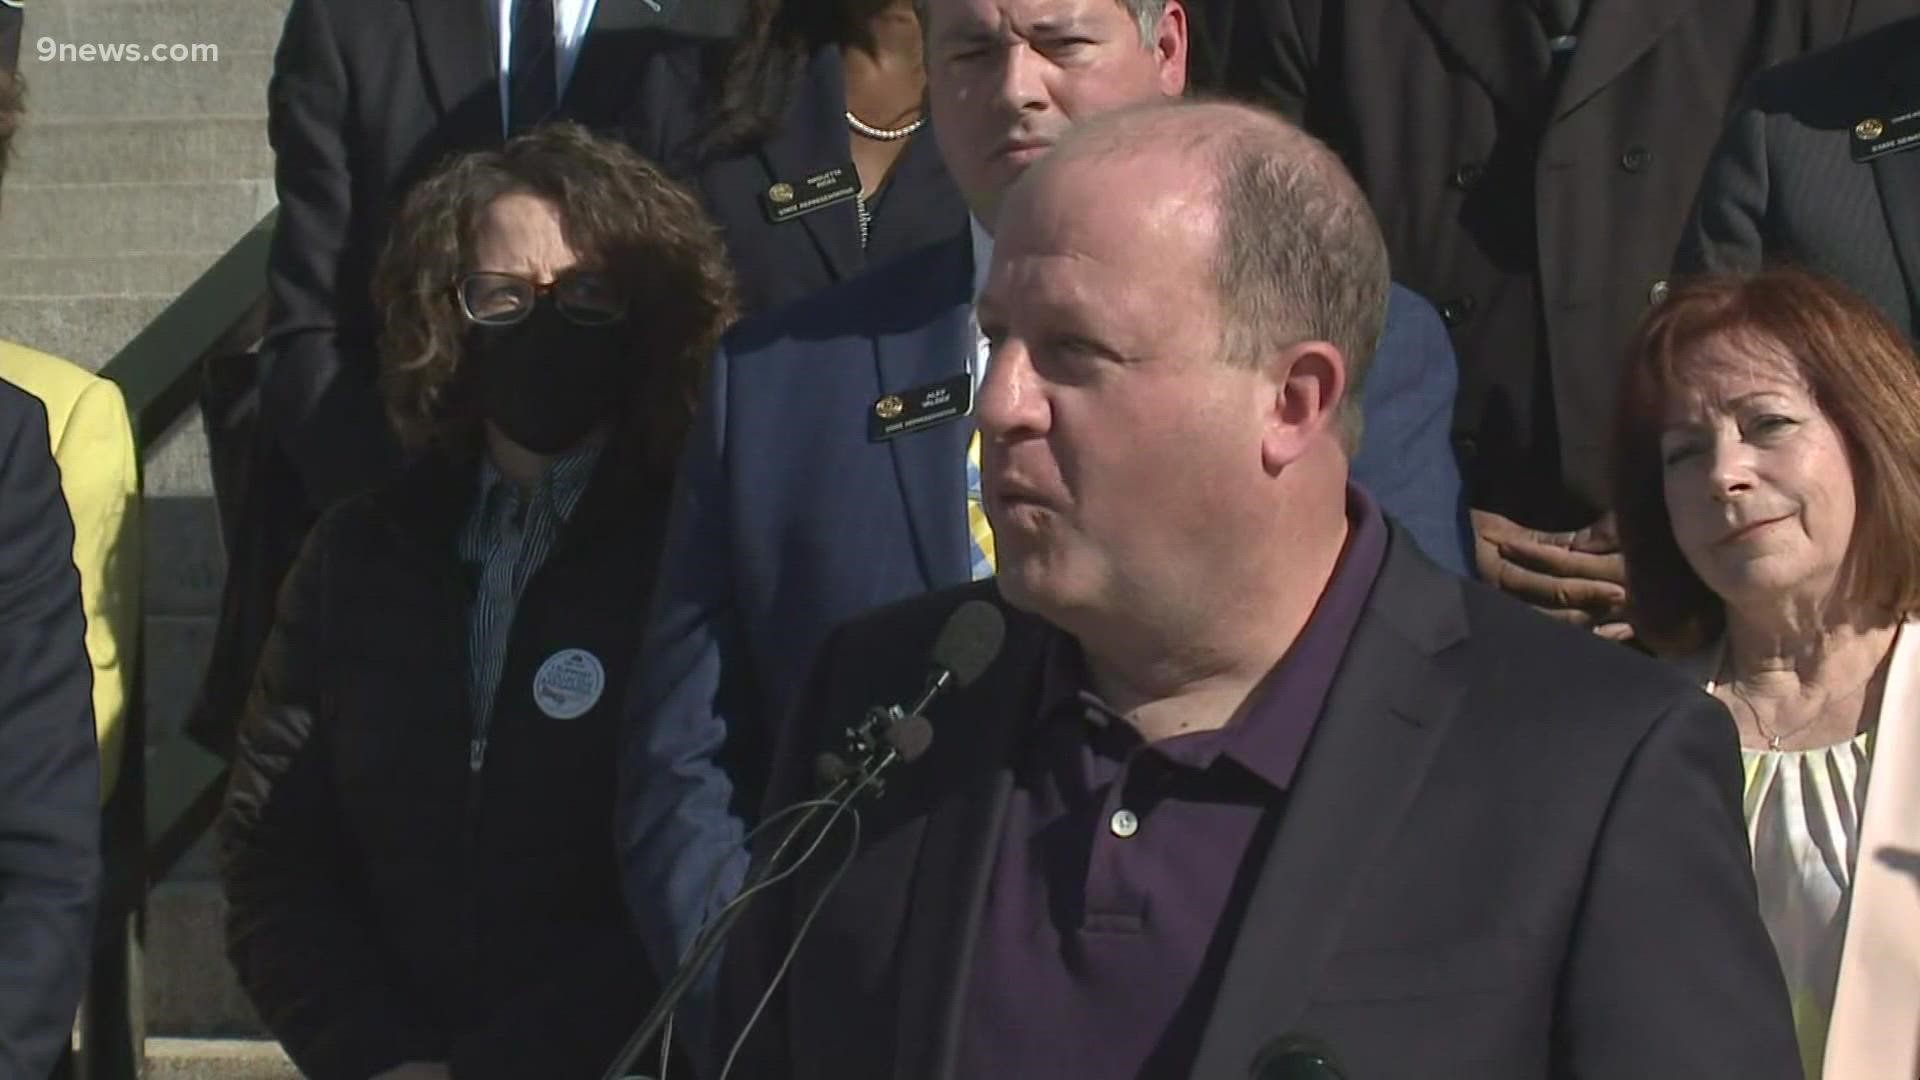 Gov. Jared Polis unveiled a $113 million public safety package designed to take Colorado from the middle of the pack to one of the top states for public safety.